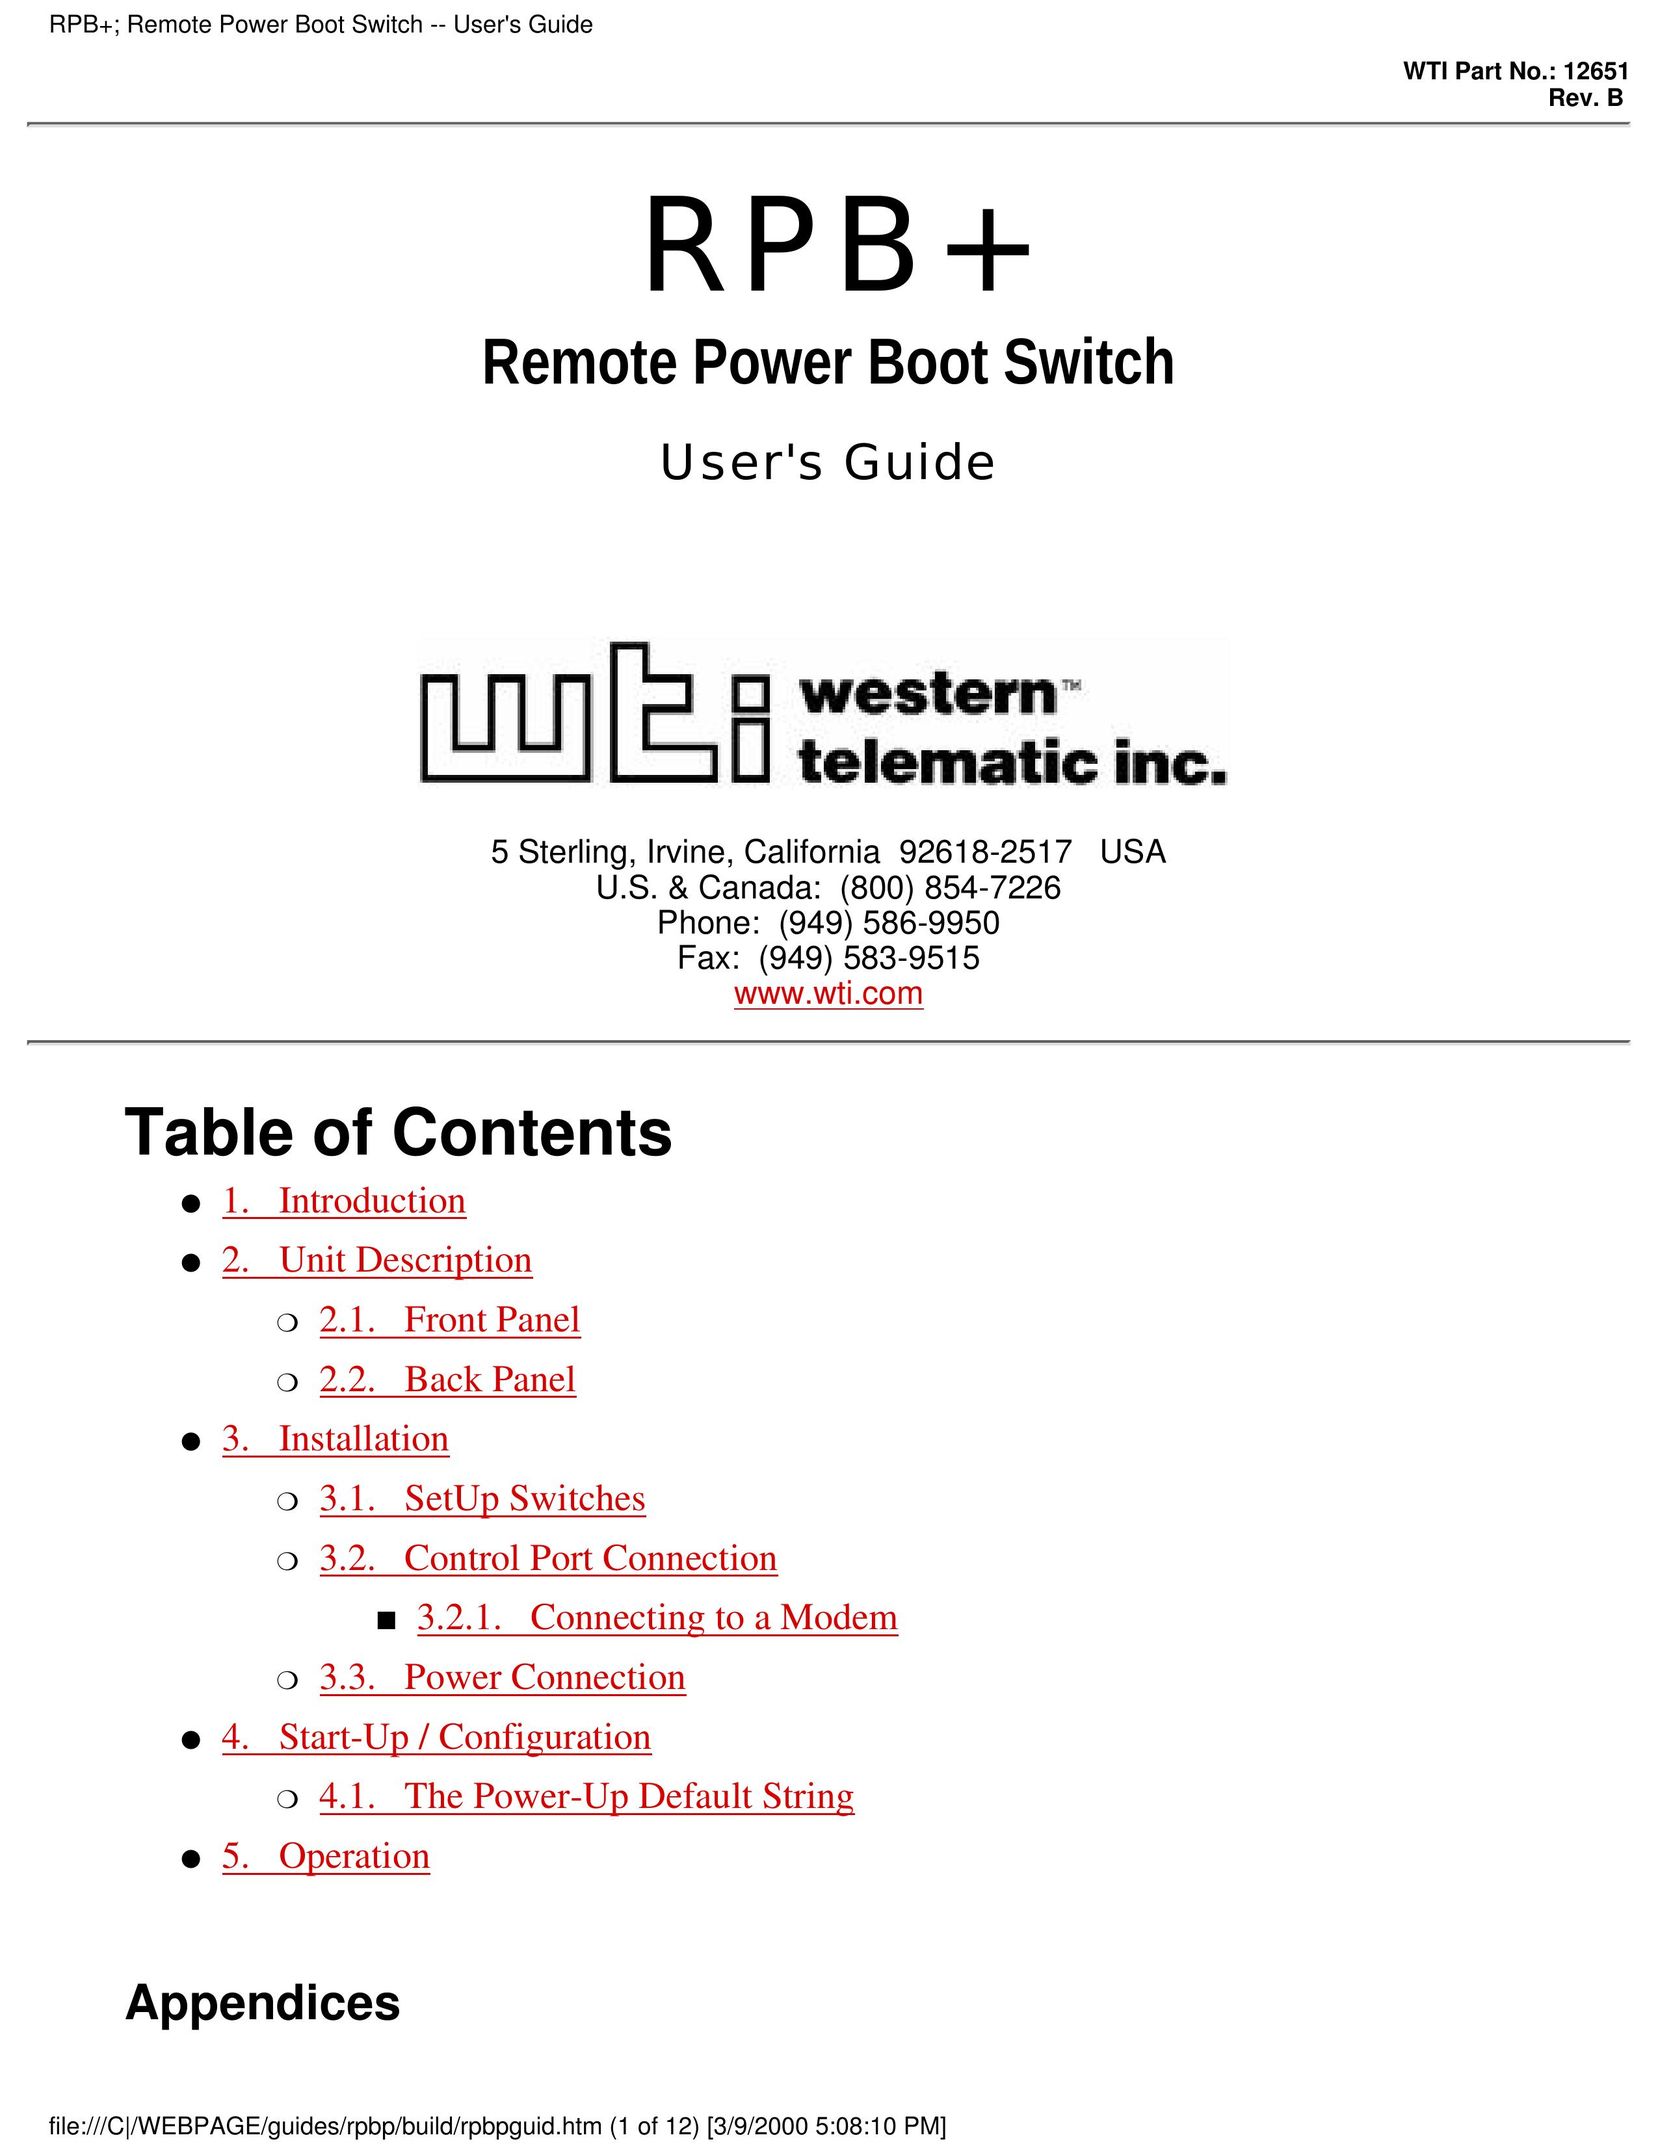 Western Telematic Remote Power Boot Switch Switch User Manual